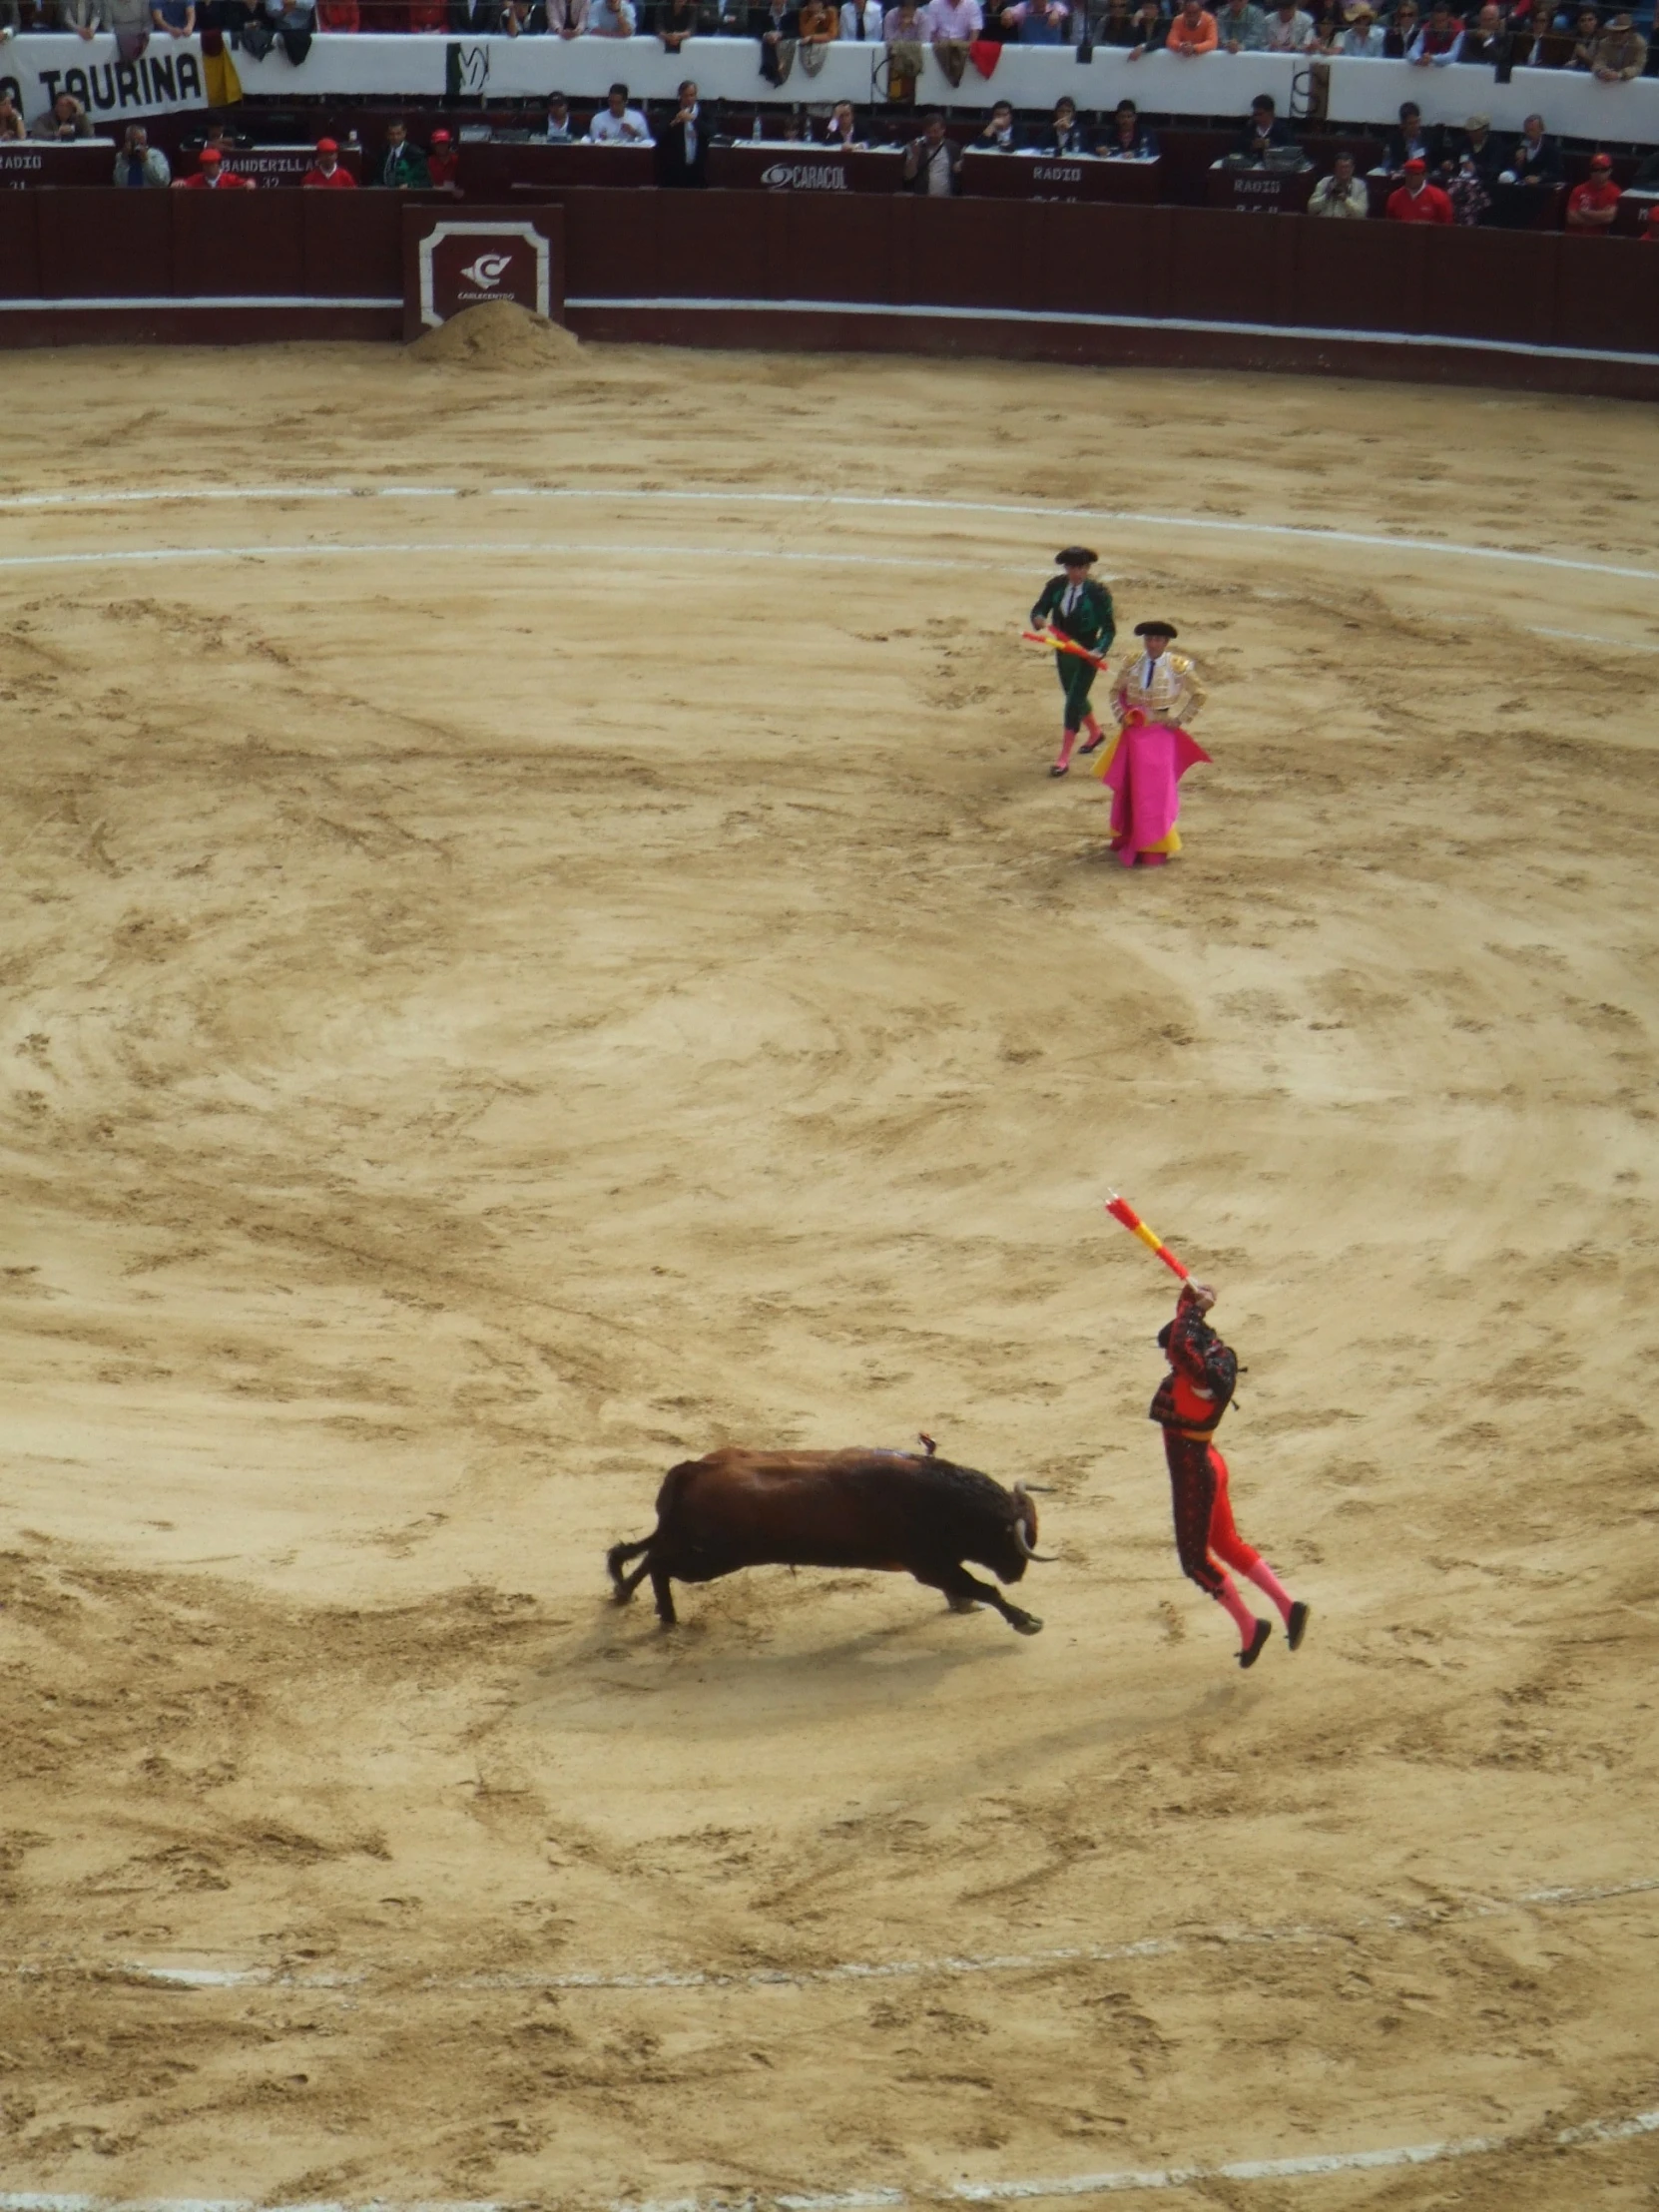 a bull running around an arena with other people watching